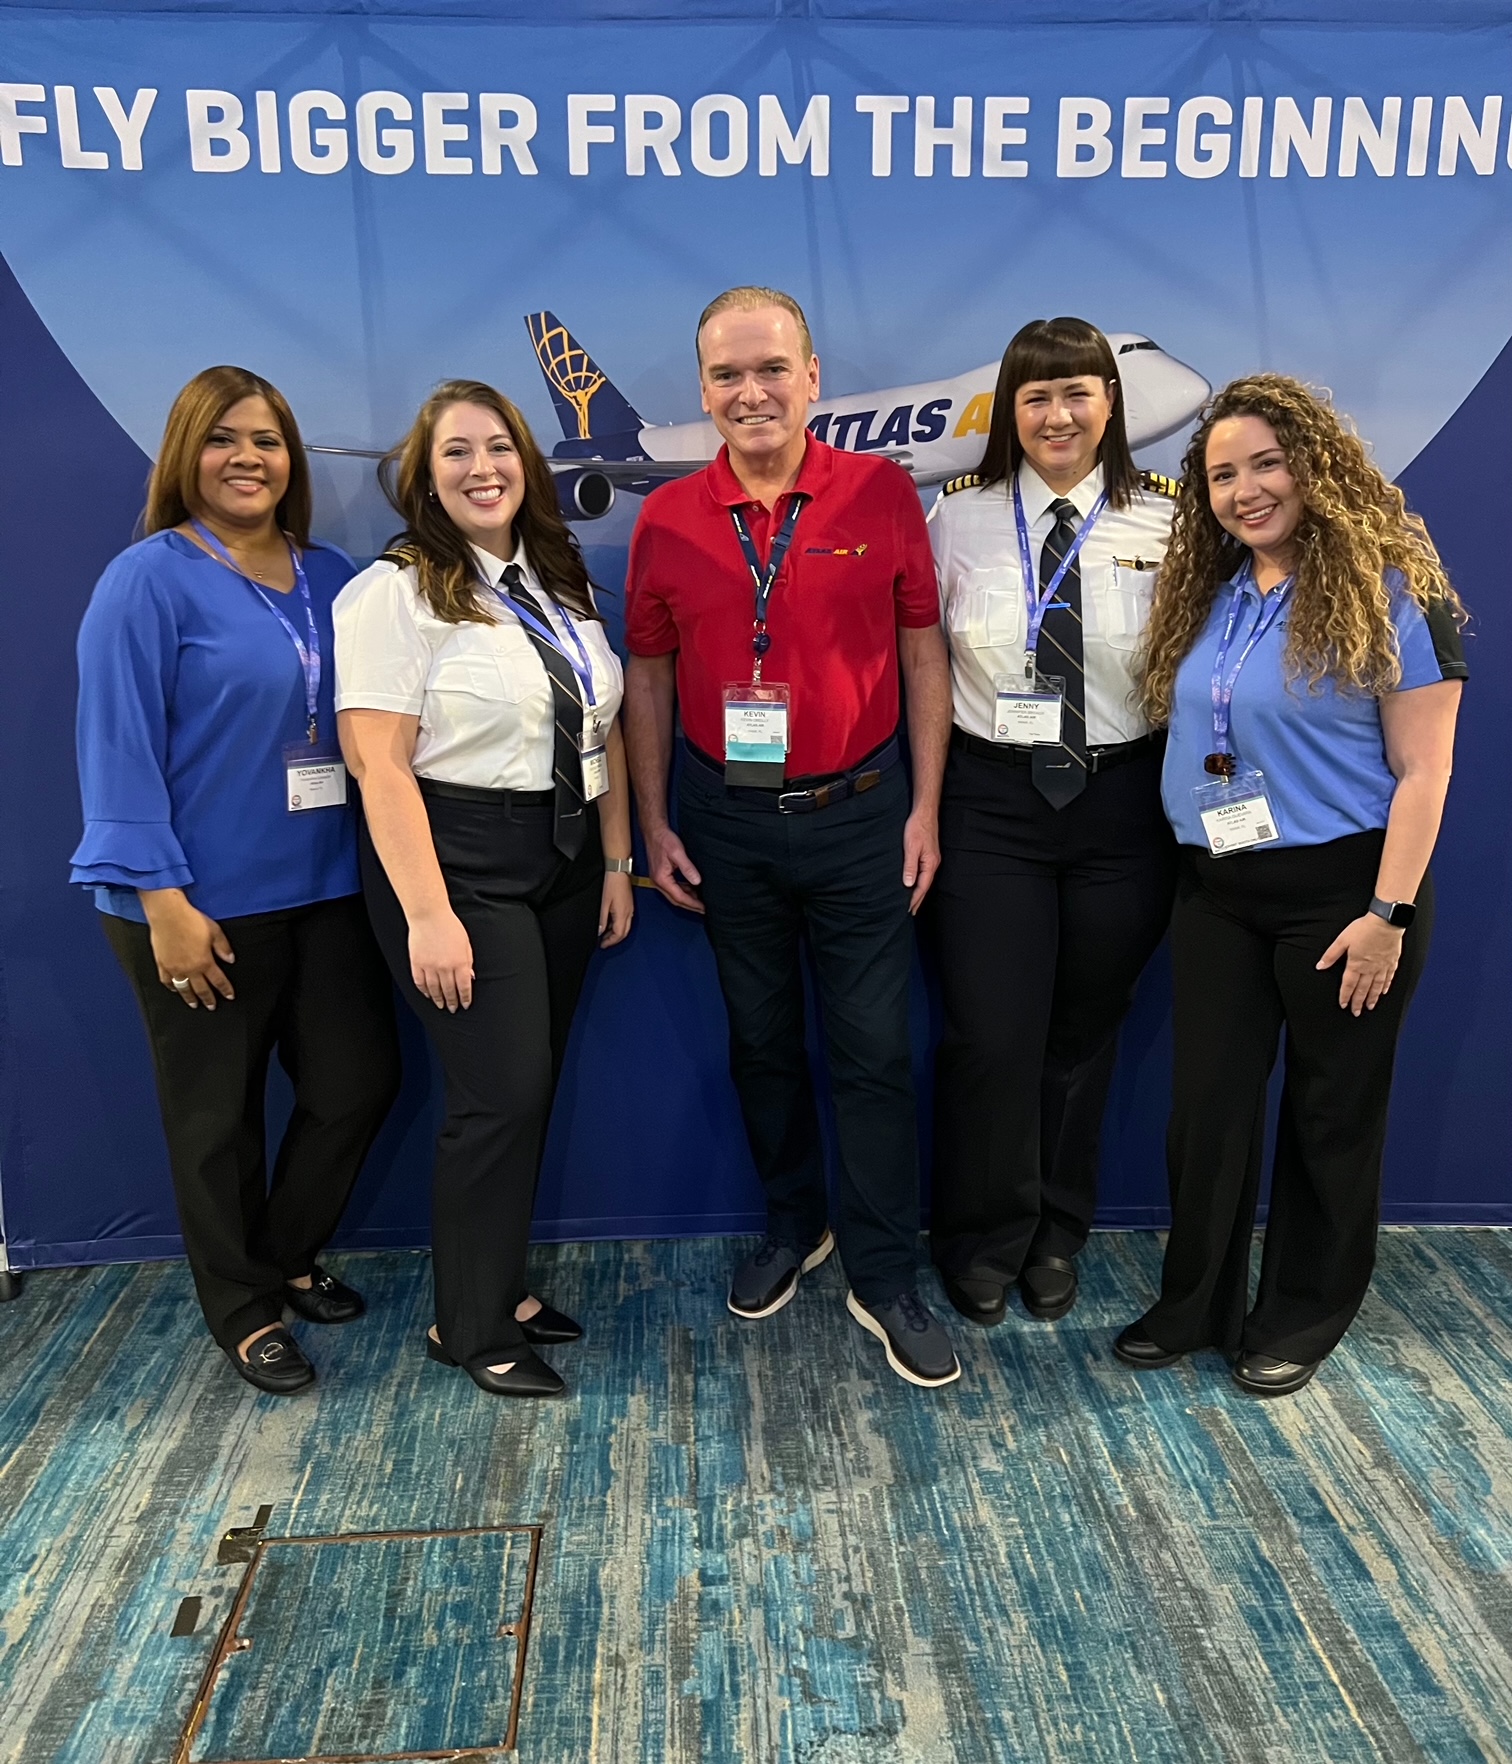 (L to R): Yovankha Untracht, 747 First Officer Michelle Phale, Kevin O’Reilly, 767 Captain Jenny Breaux, and Karina Guevara